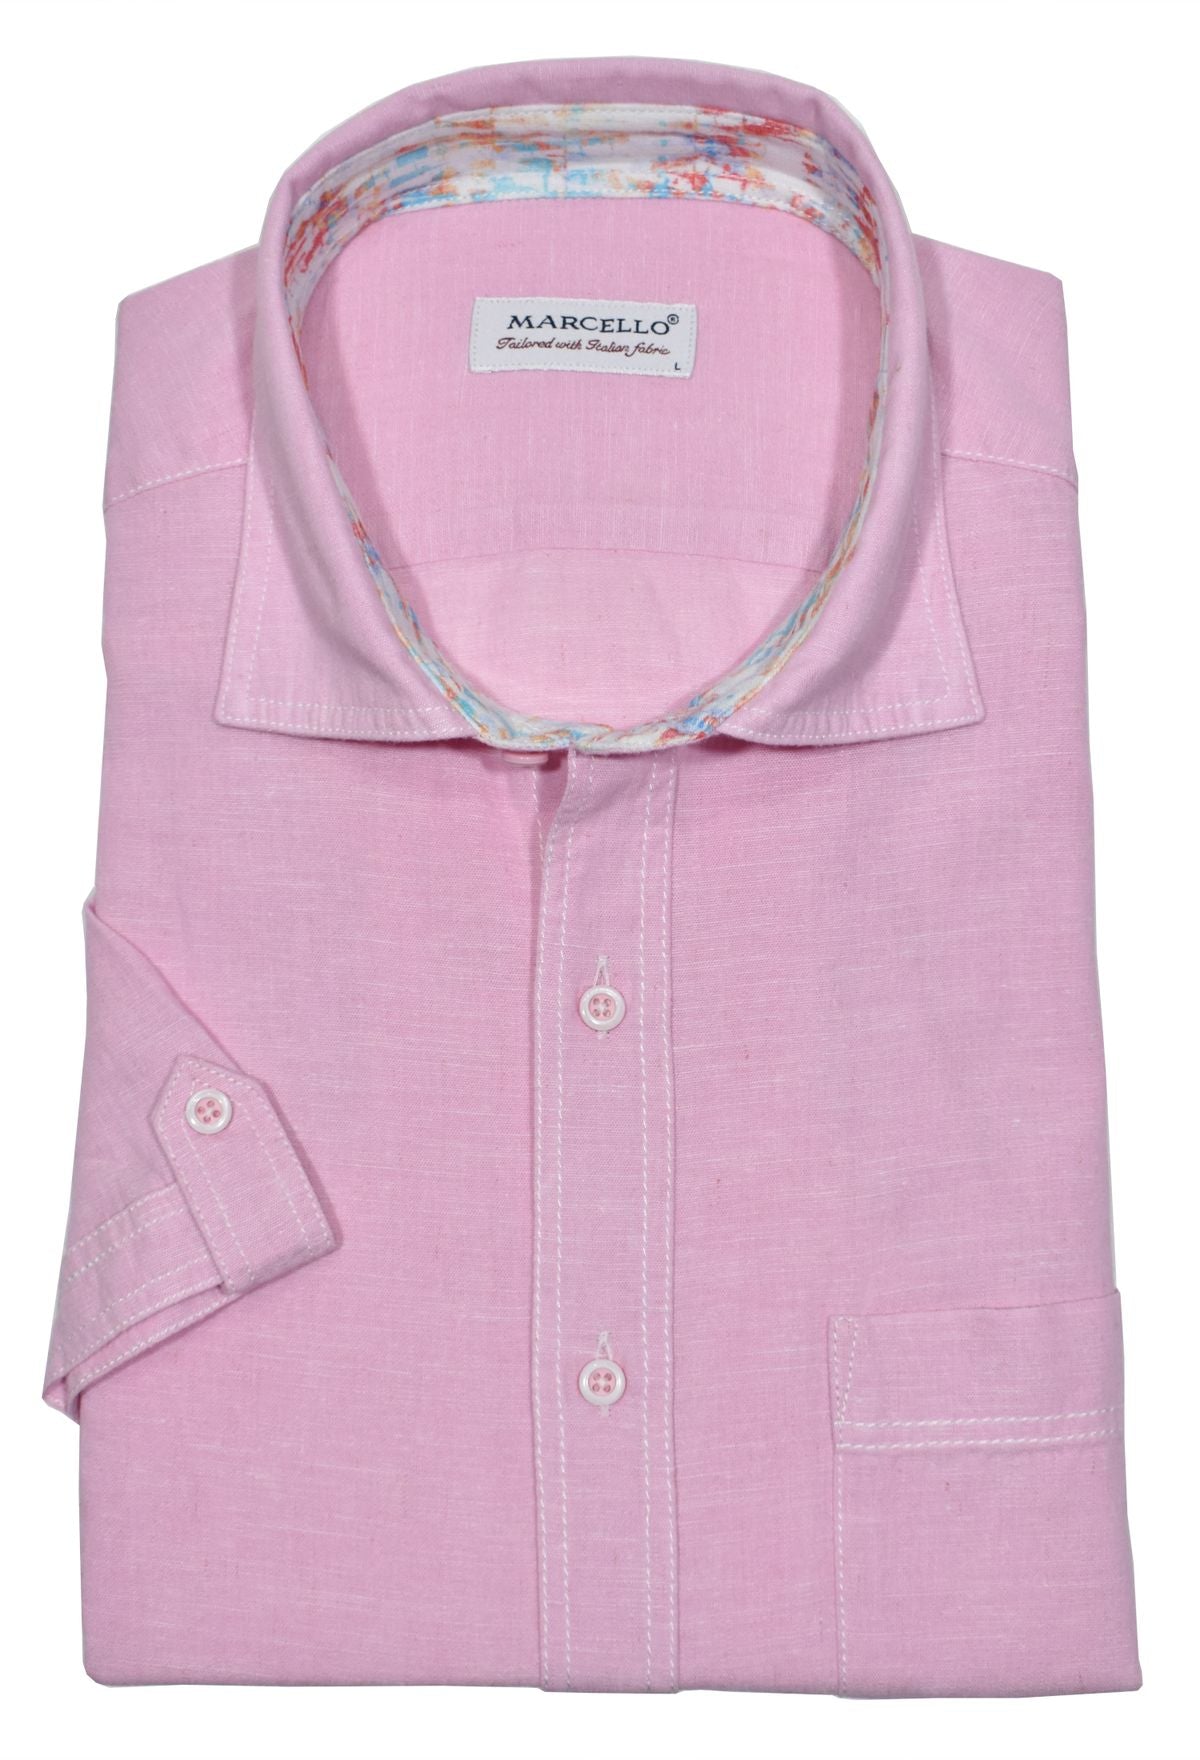 Upgrade your wardrobe with the Marcello W834S Pink Cotton Linen shirt. Experience the luxurious softness of cotton combined with the elegant linen-like appearance. With a soft collar, multi-track contrast stitching, and a classic chest pocket, this shirt is both stylish and comfortable.